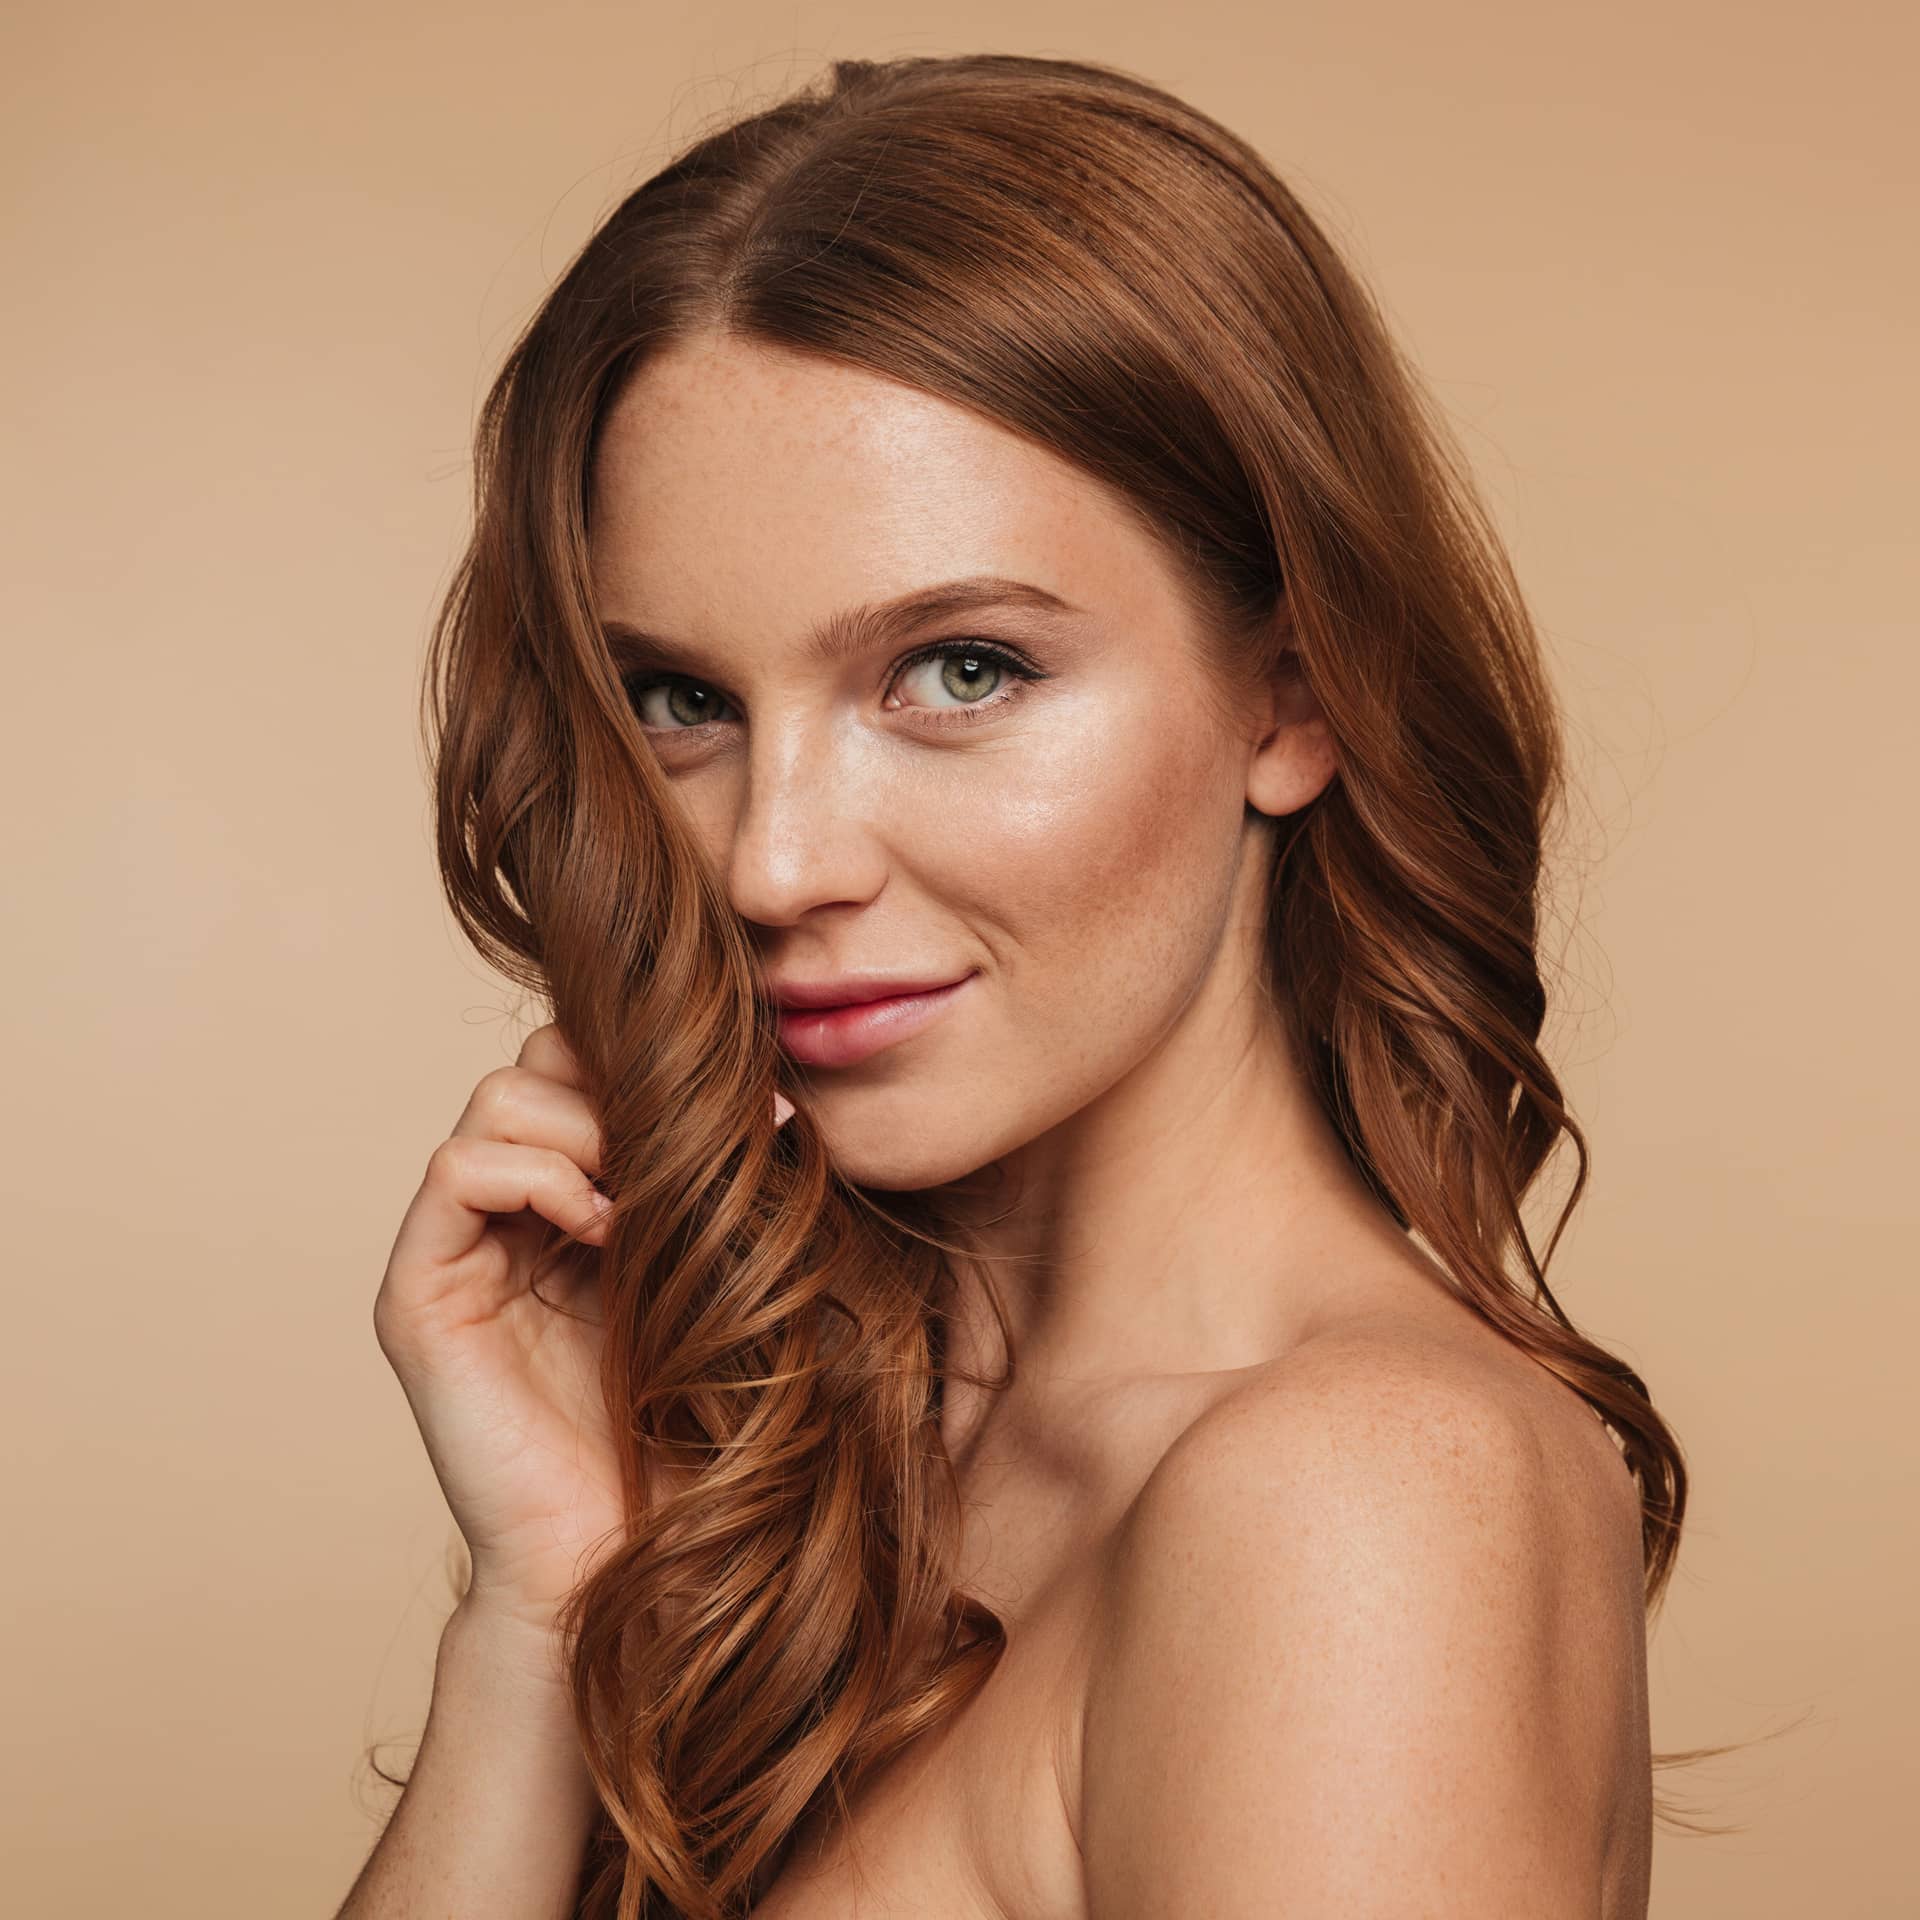 Mystery smiling ginger woman with long hair posing sideways looking